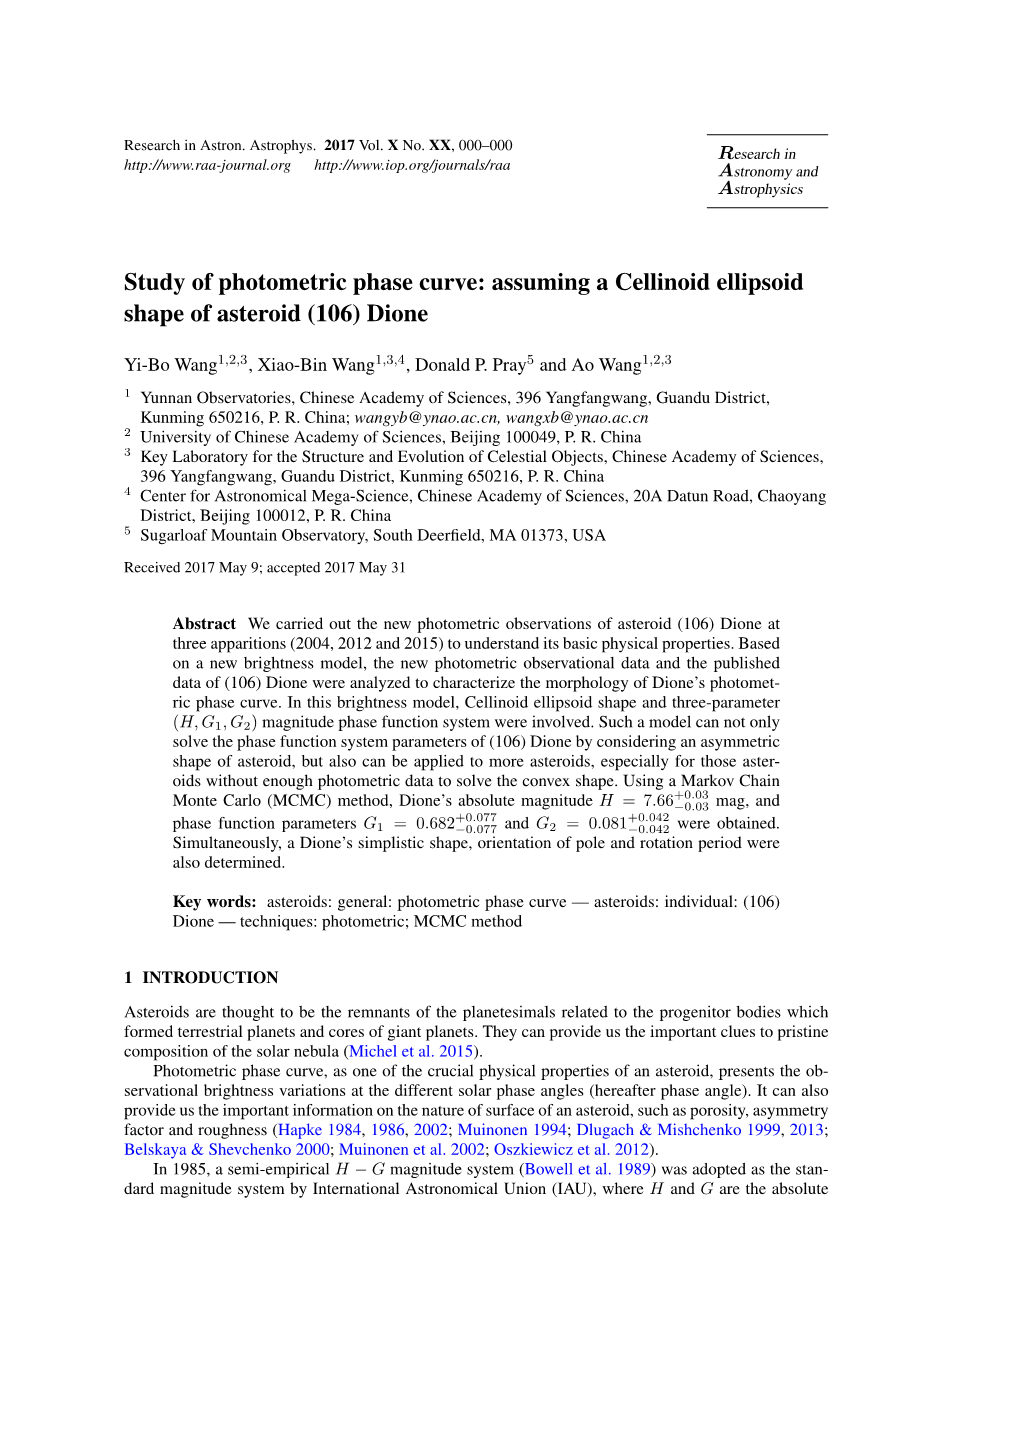 Study of Photometric Phase Curve: Assuming a Cellinoid Ellipsoid Shape of Asteroid (106) Dione